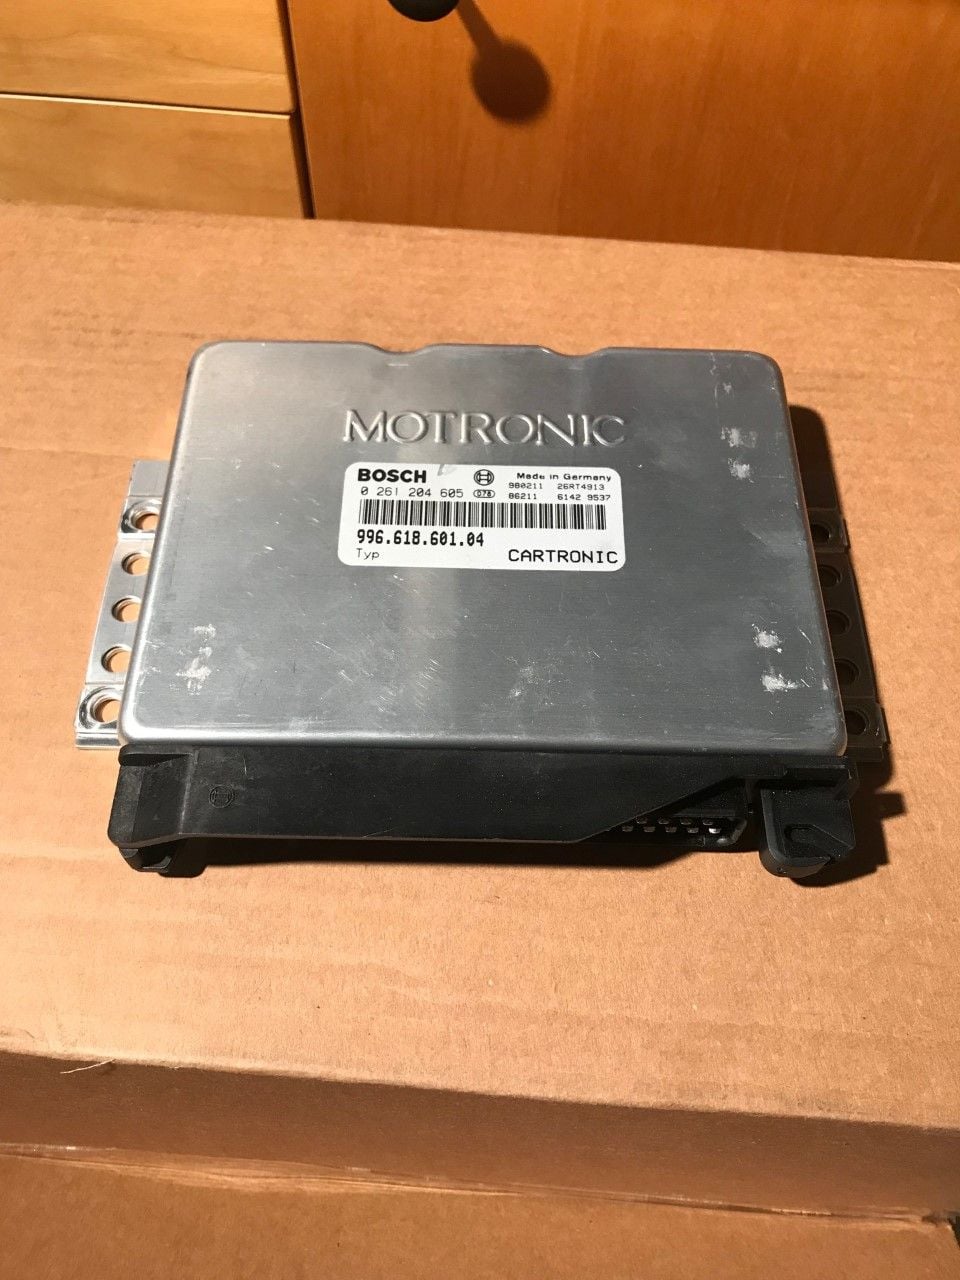 2000 Porsche 911 - 996 618 601 04 Engine Control Module - Engine - Electrical - $200 - Plainview, NY 11803, United States